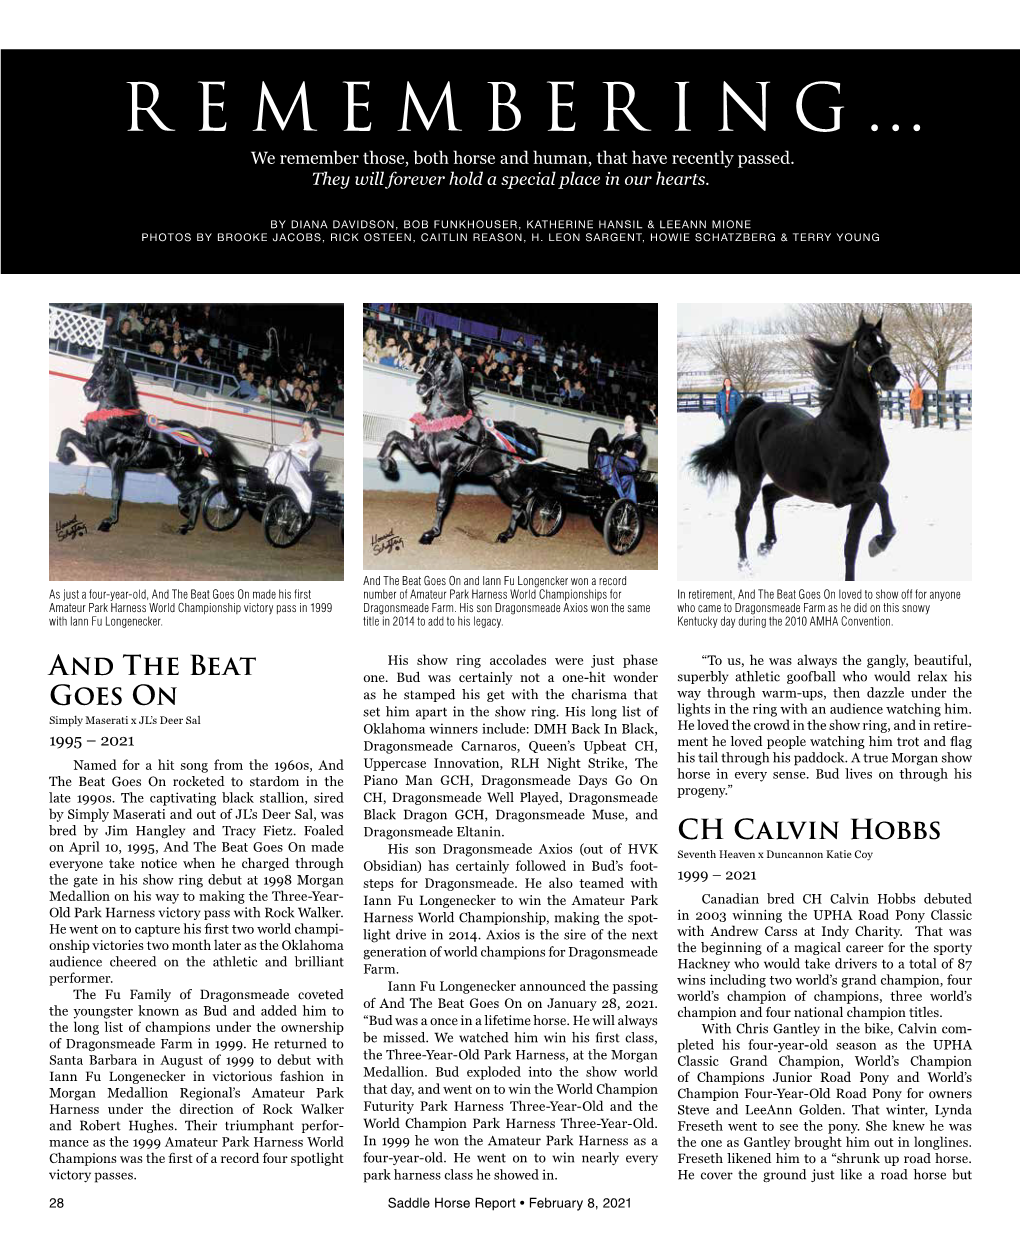 REMEMBERING… We Remember Those, Both Horse and Human, That Have Recently Passed